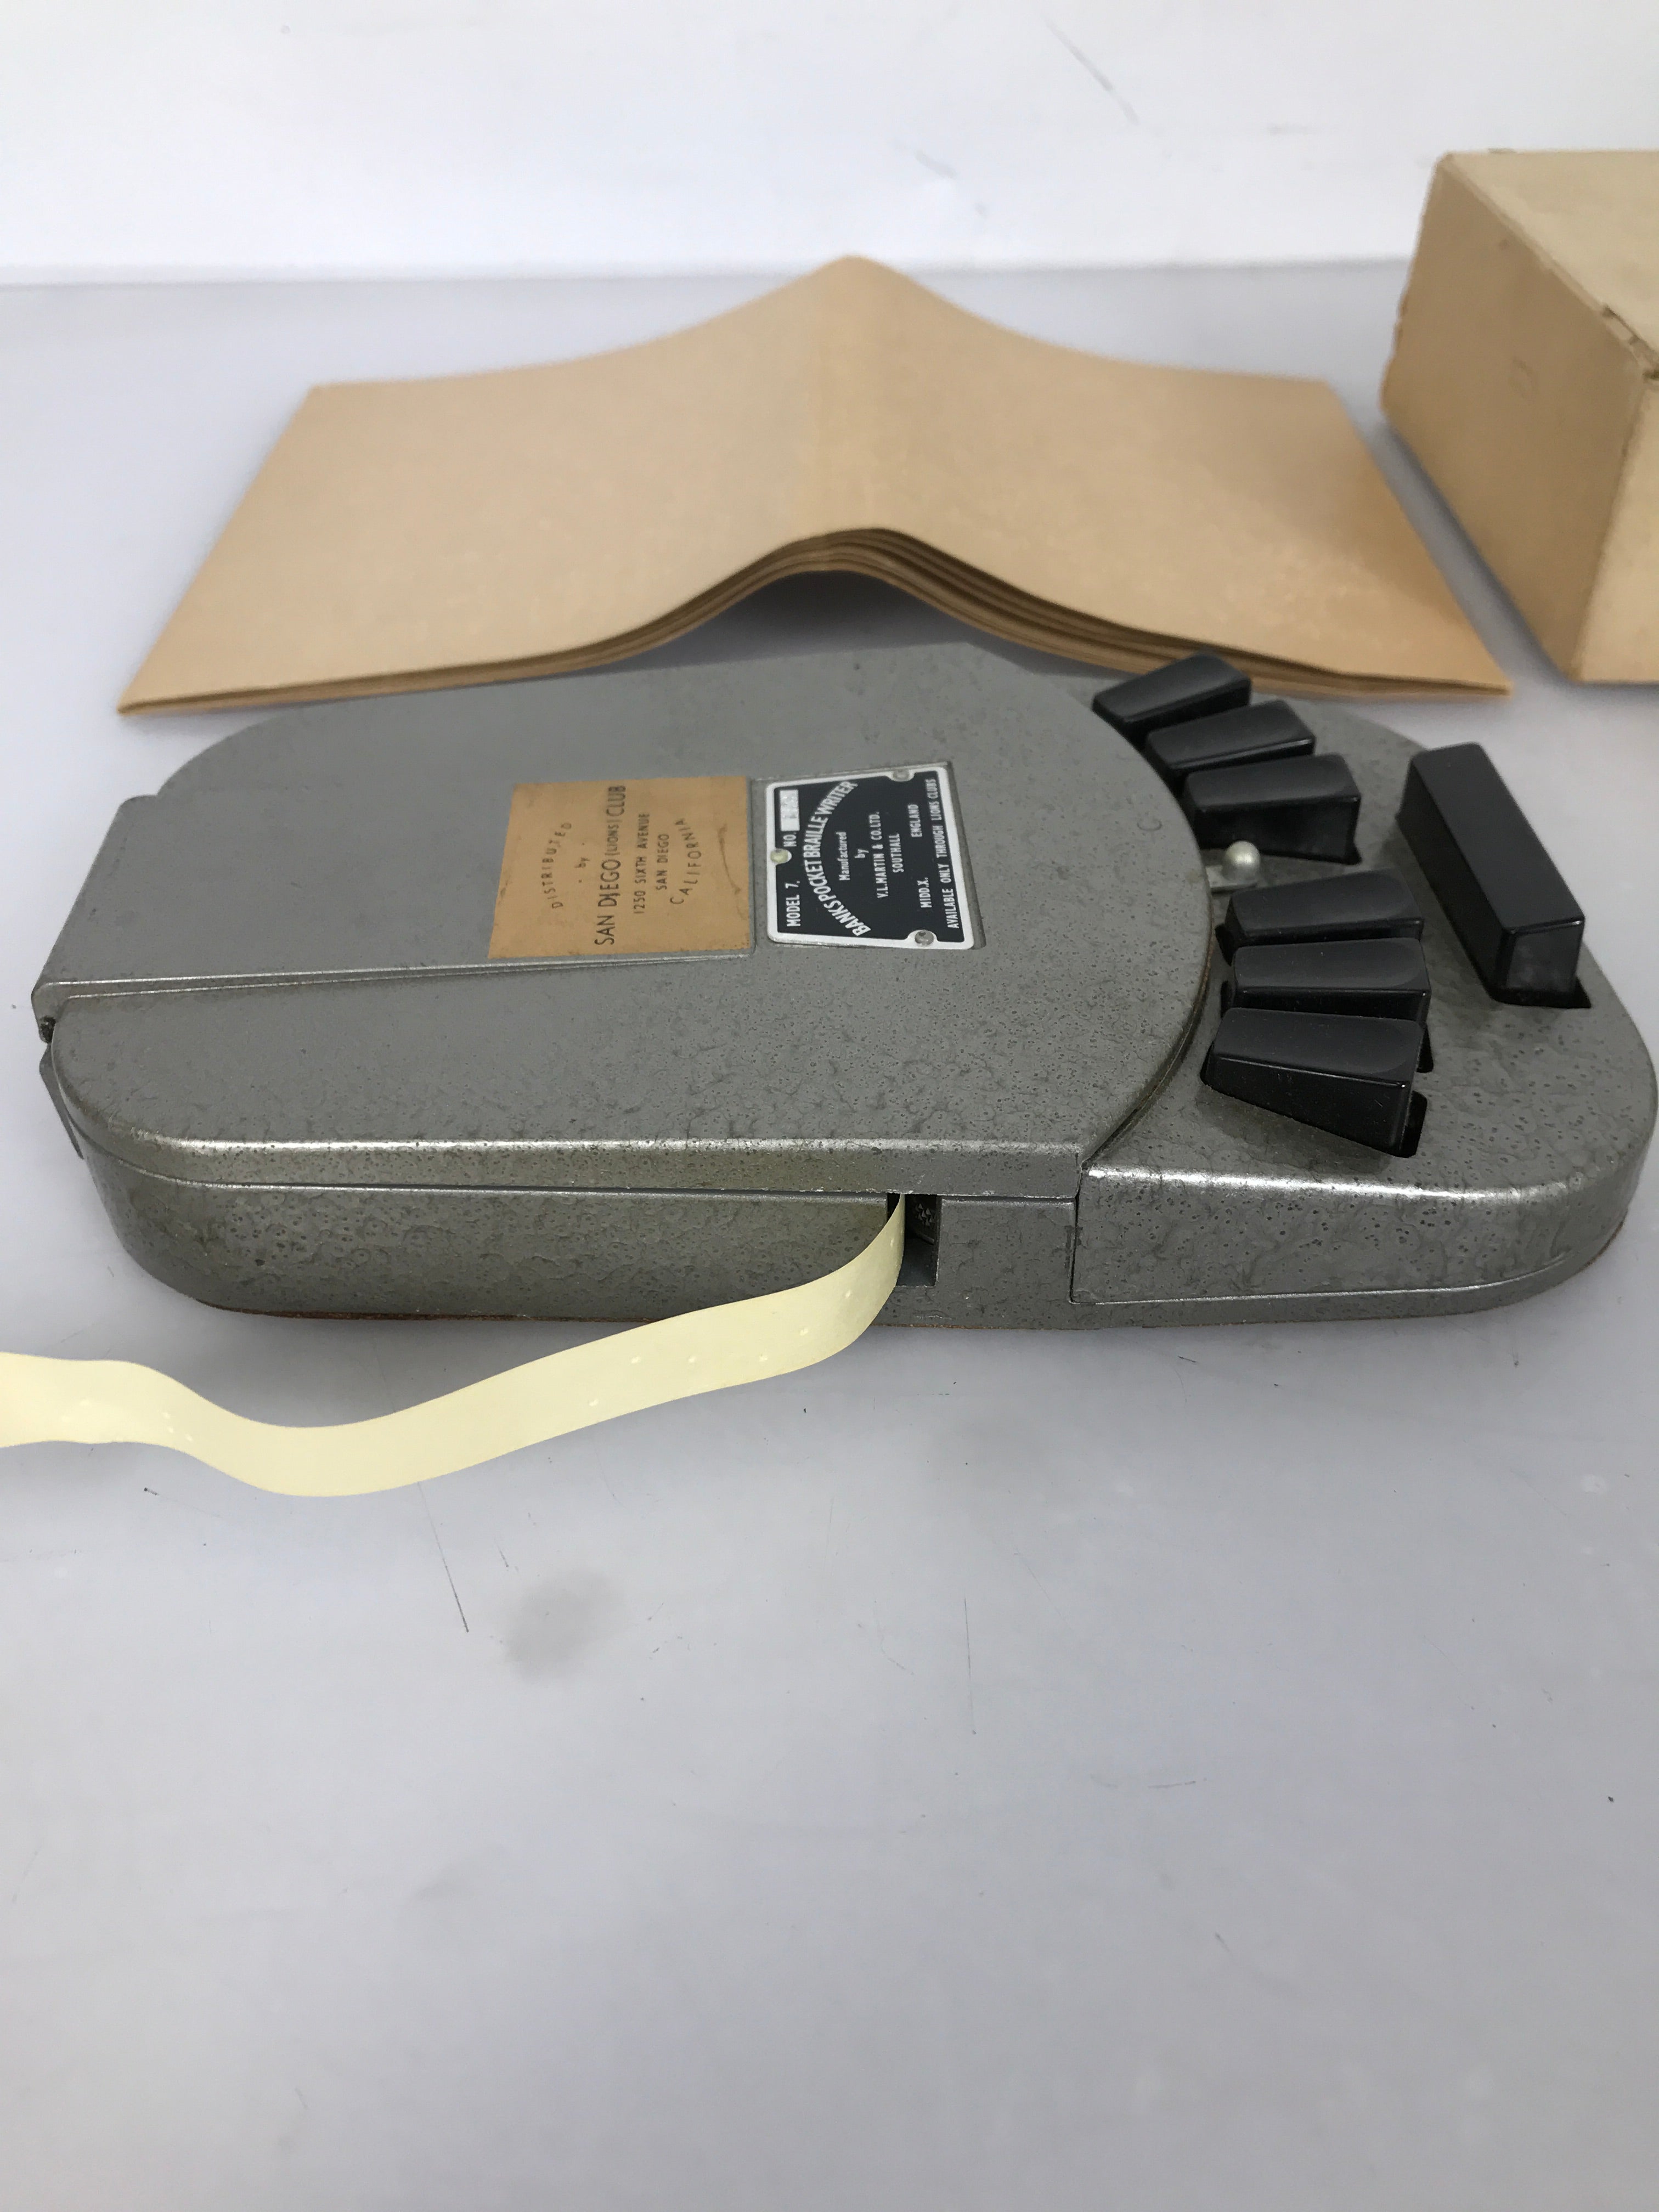 Banks Pocket Braille Writer No. 7 with Box & Instructions